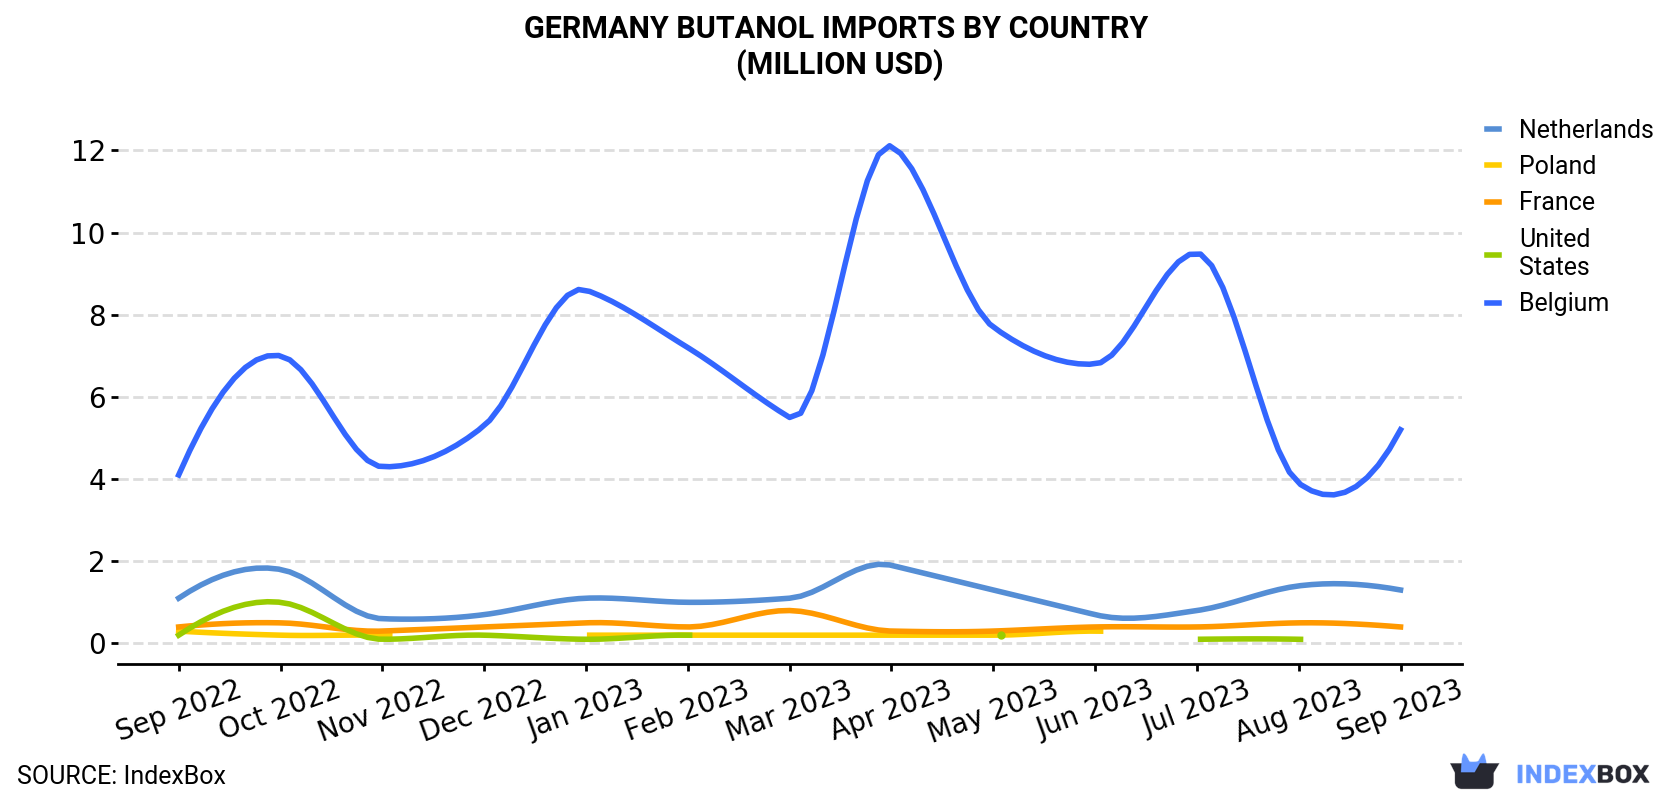 Germany Butanol Imports By Country (Million USD)